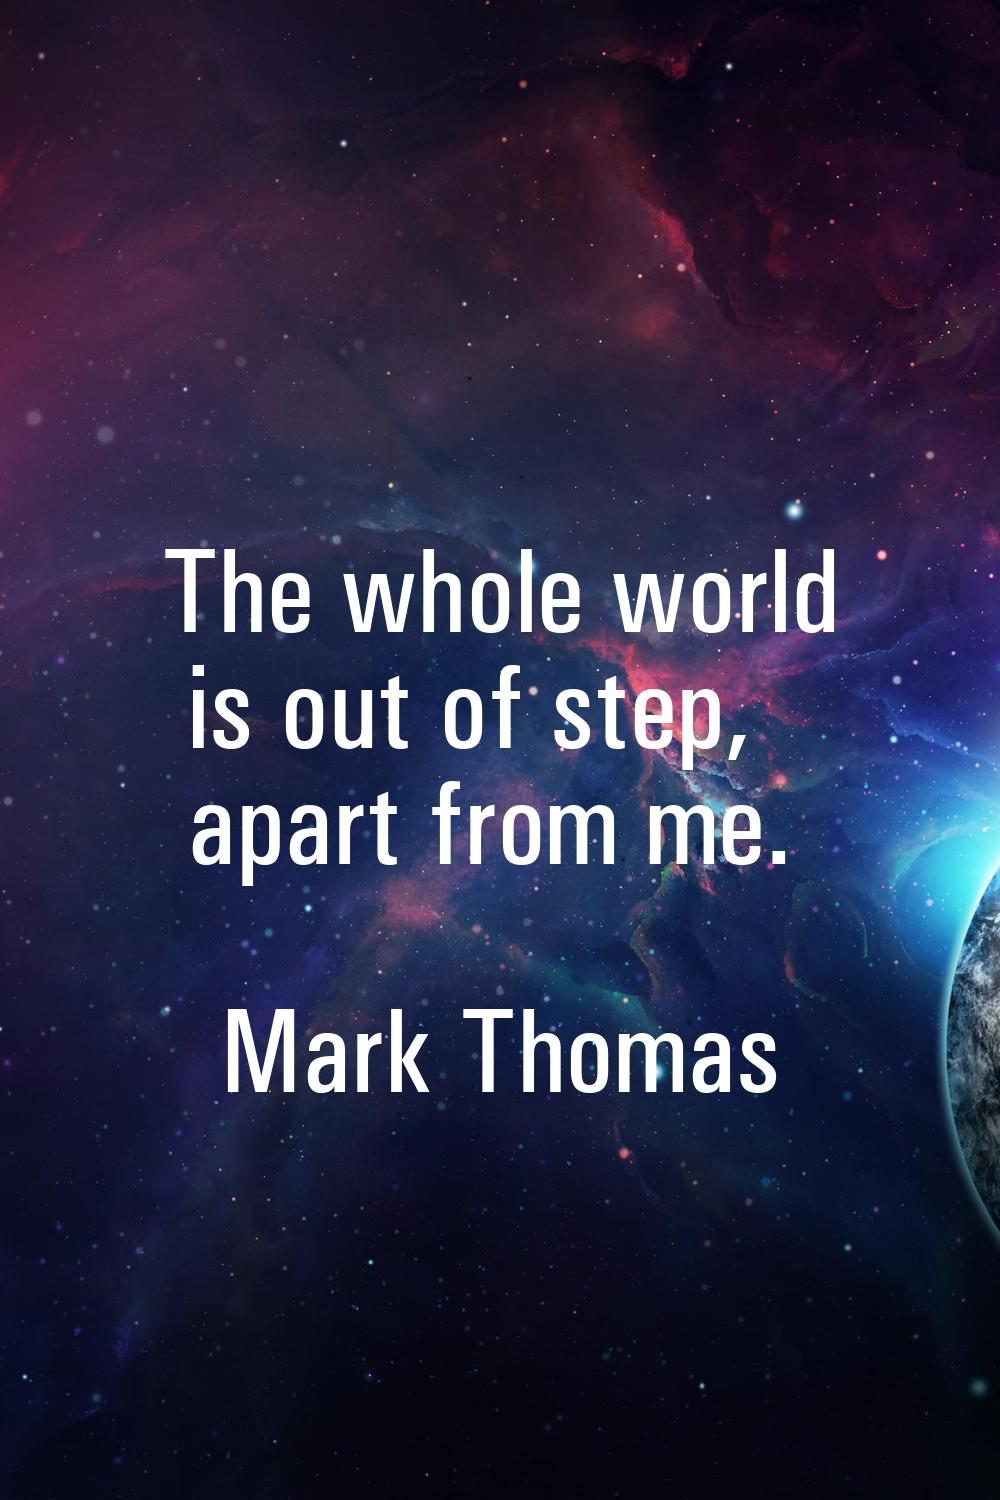 The whole world is out of step, apart from me.